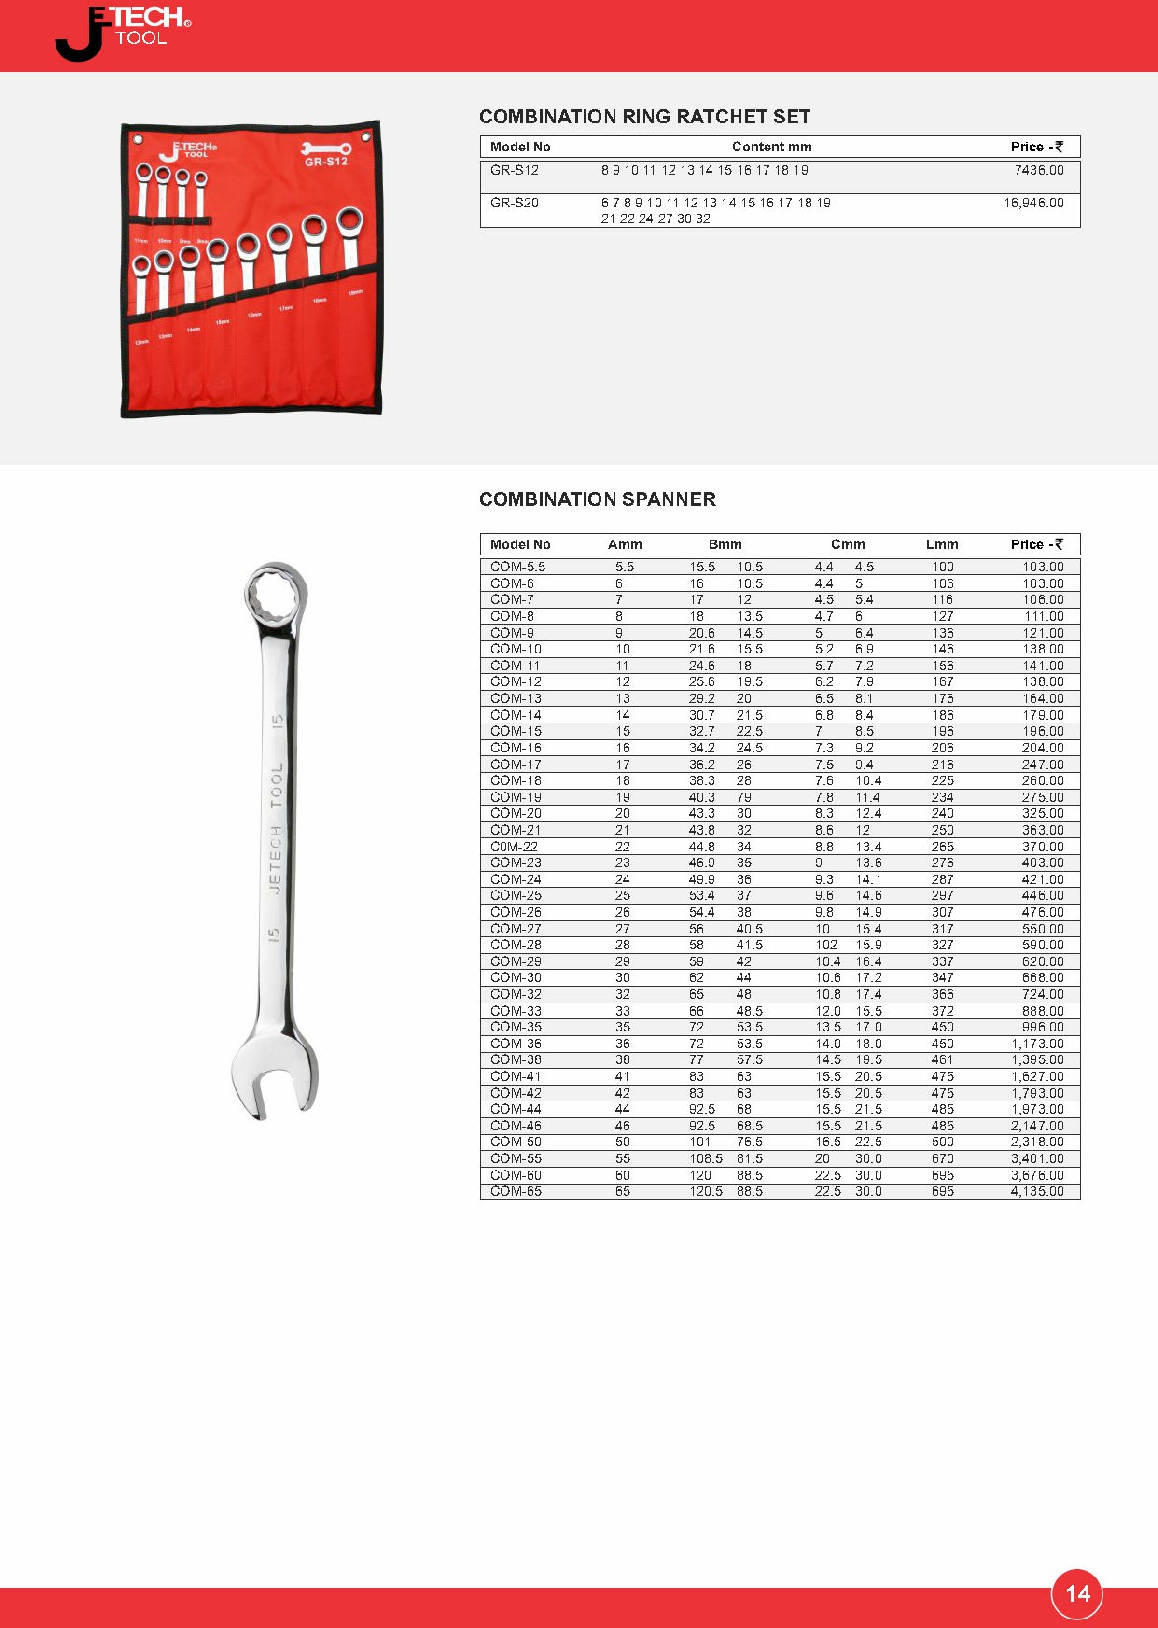 combination ring ratchet set,combiantion spanner, chennai jetech tools